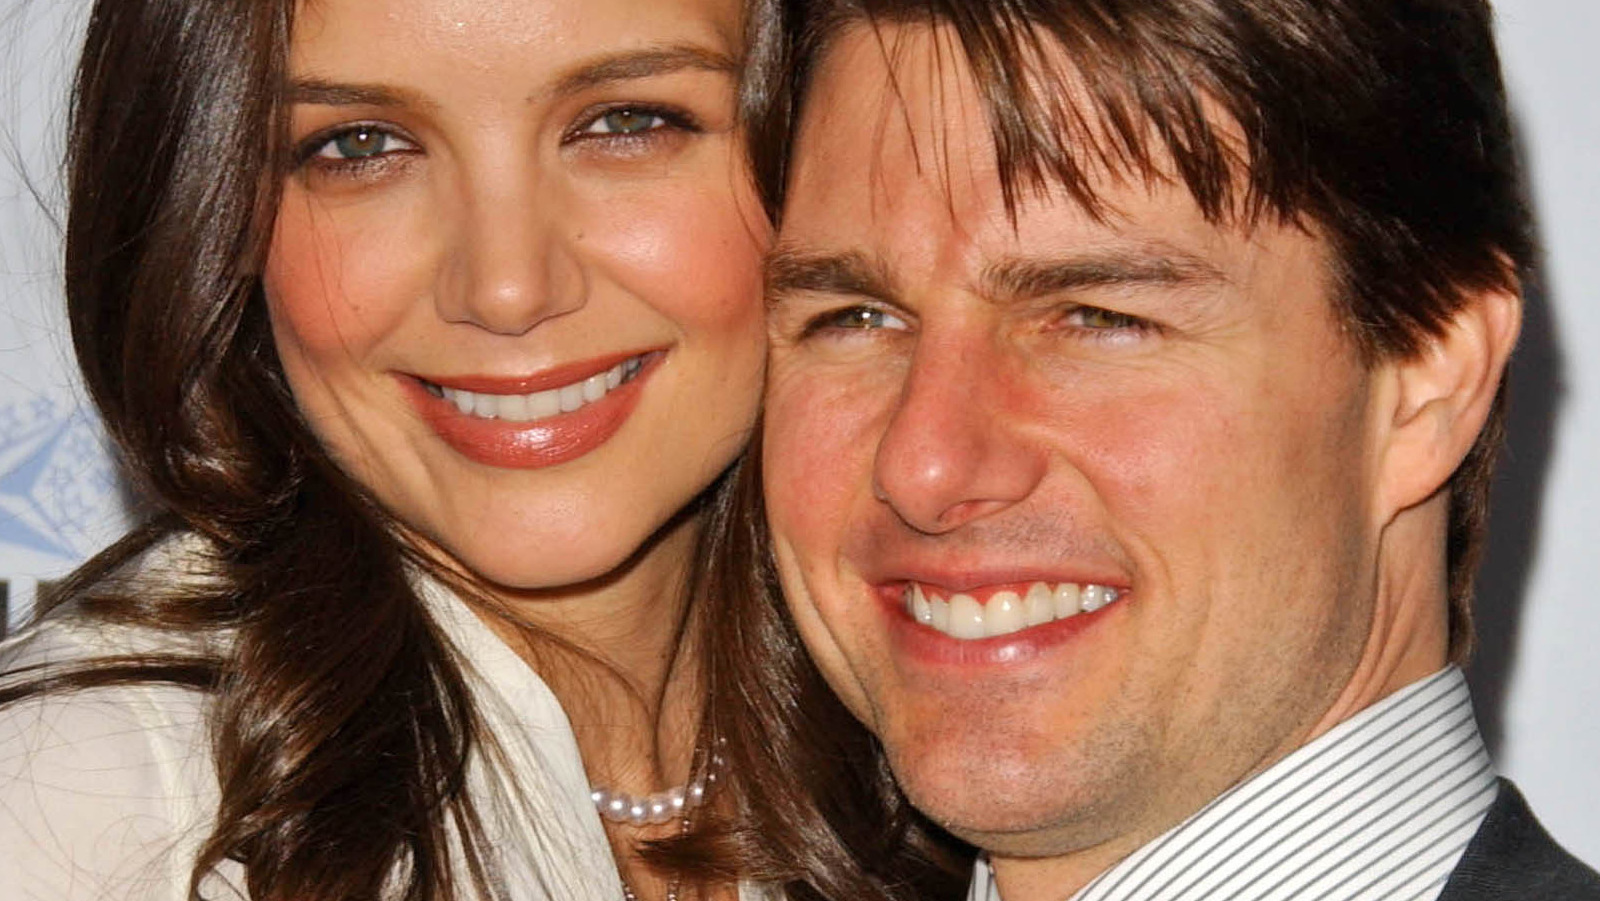 This Is Why Tom Cruise And Katie Holmes Really Divorced.